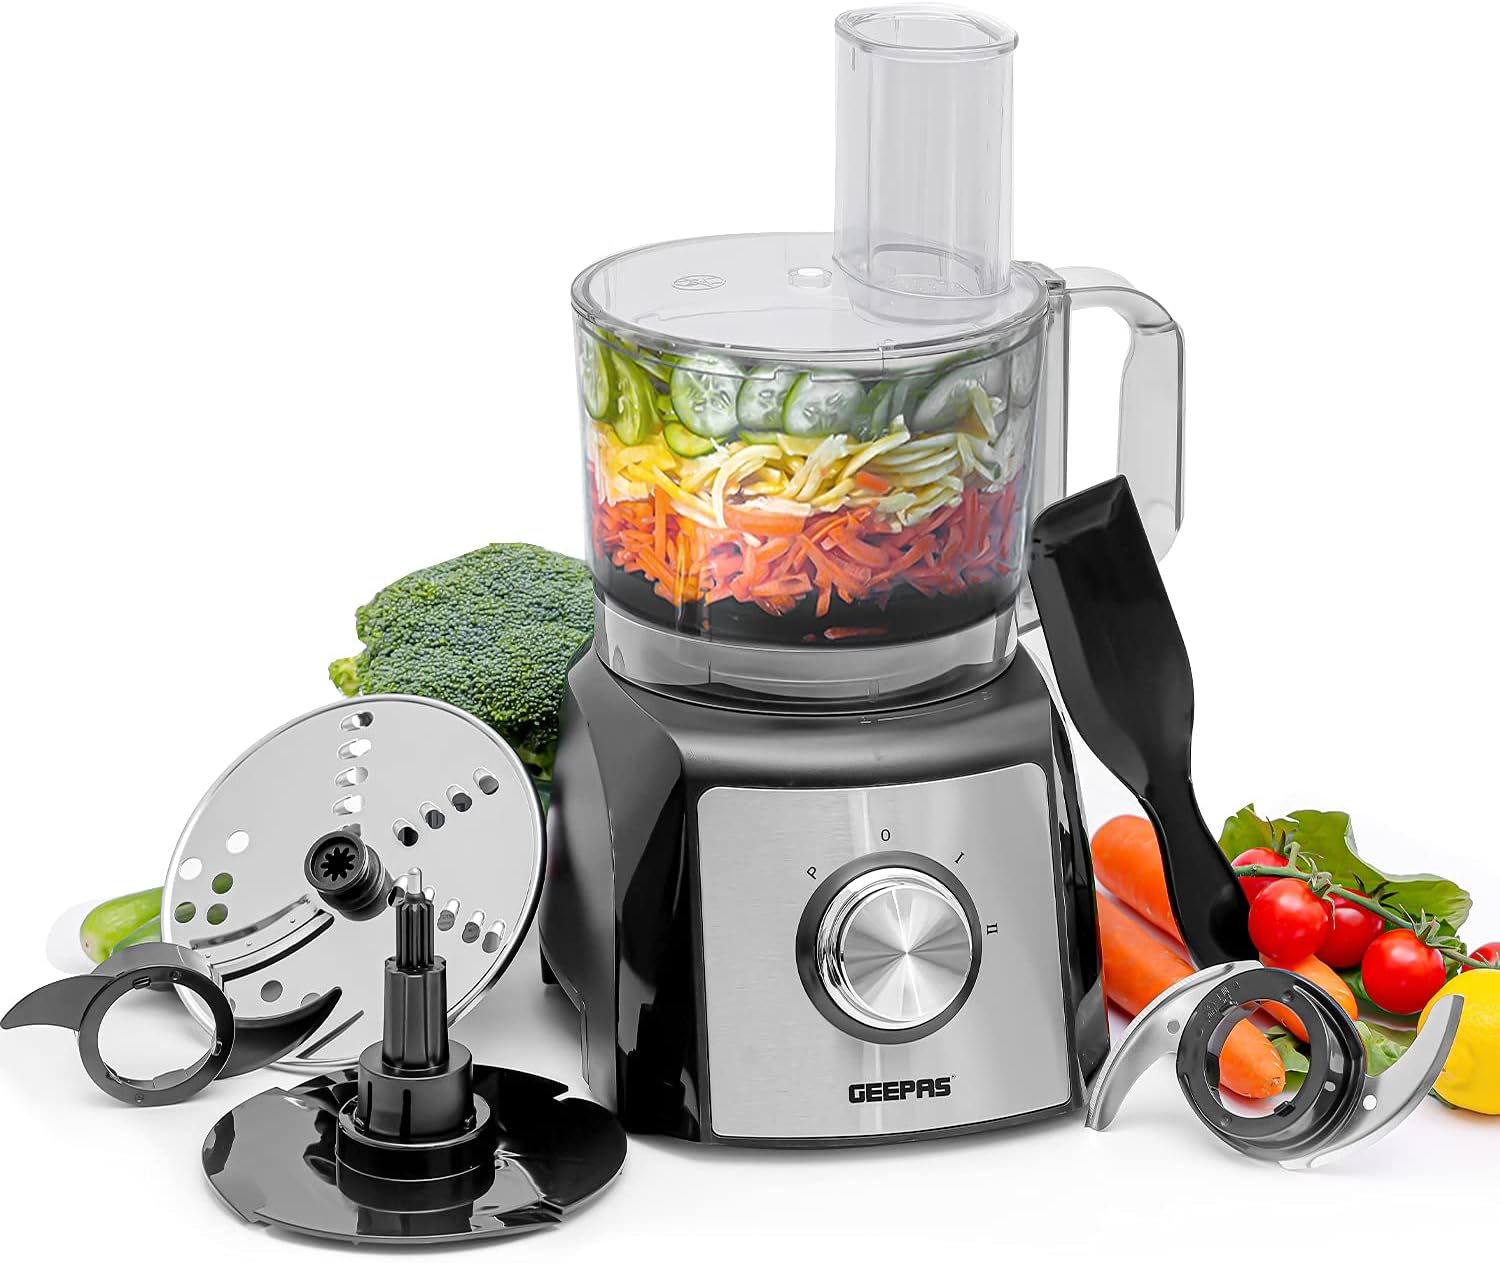 Geepas Geepas gmc42015Uk 1200W Compact Food Processor 1.2L Bowl Capacity Stainless Steel & Dough Blades Included 2 Years Warranty, Black, 1200W 6 In 1